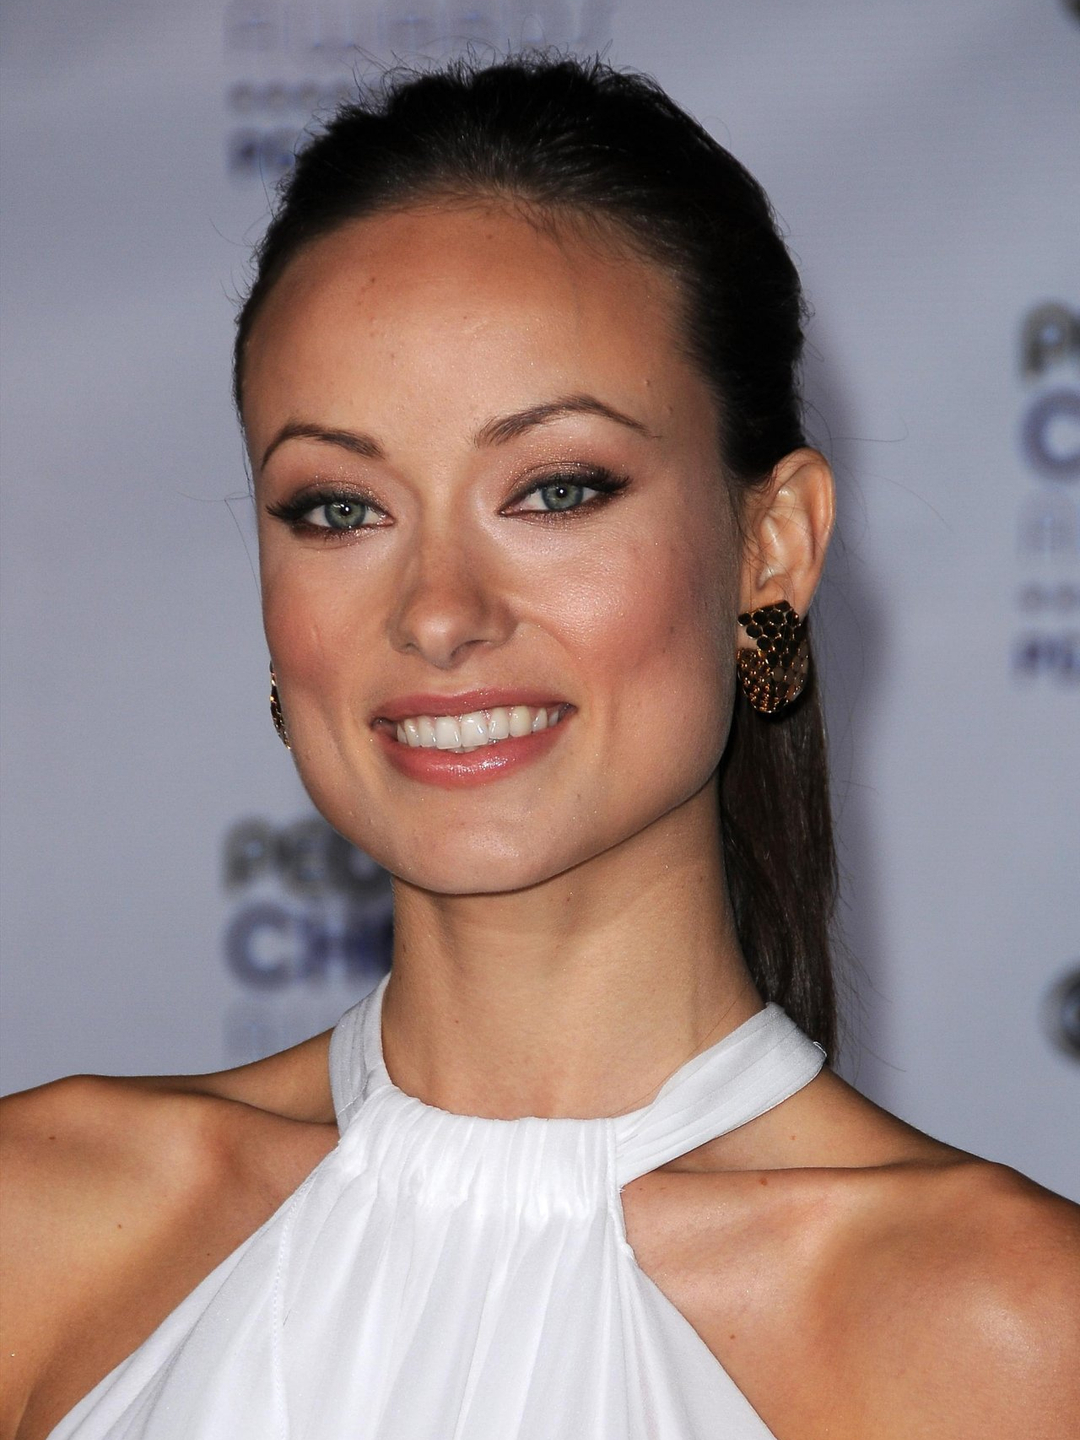 Olivia Wilde who are her parents